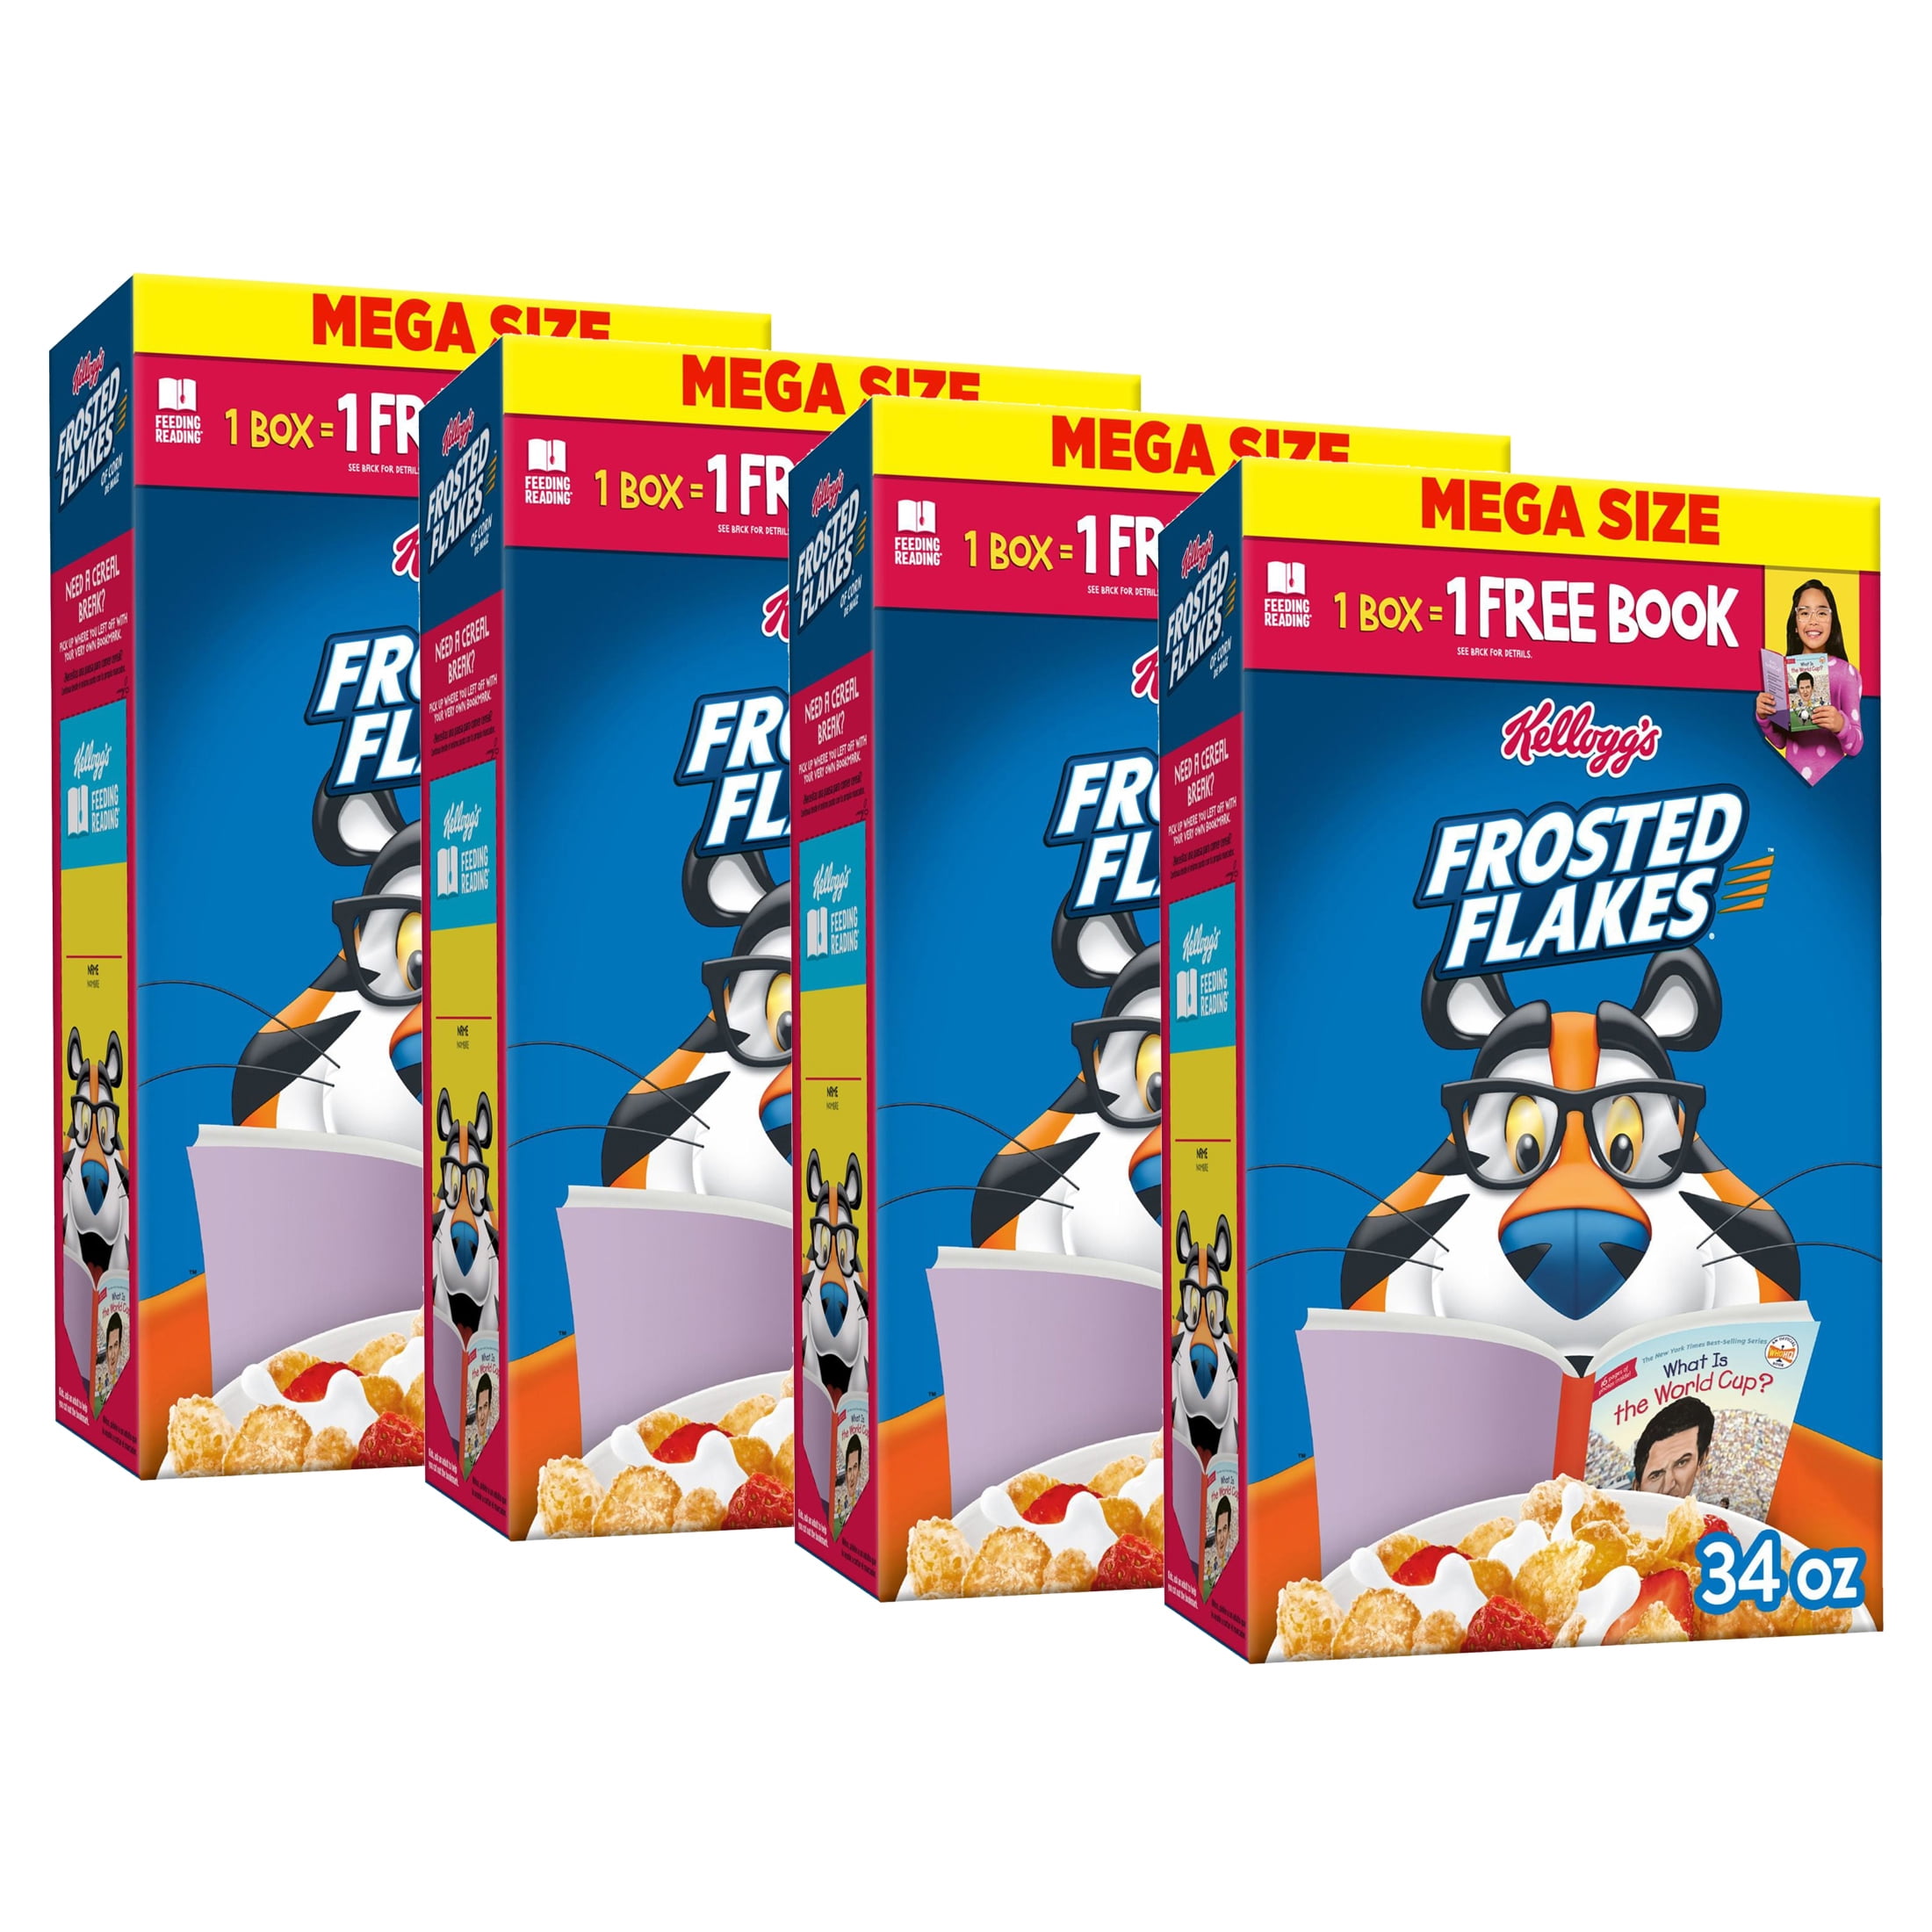 4 pack) Kellogg's Frosted Flakes Original Breakfast Cereal, Mega Size, 34 oz  Box 